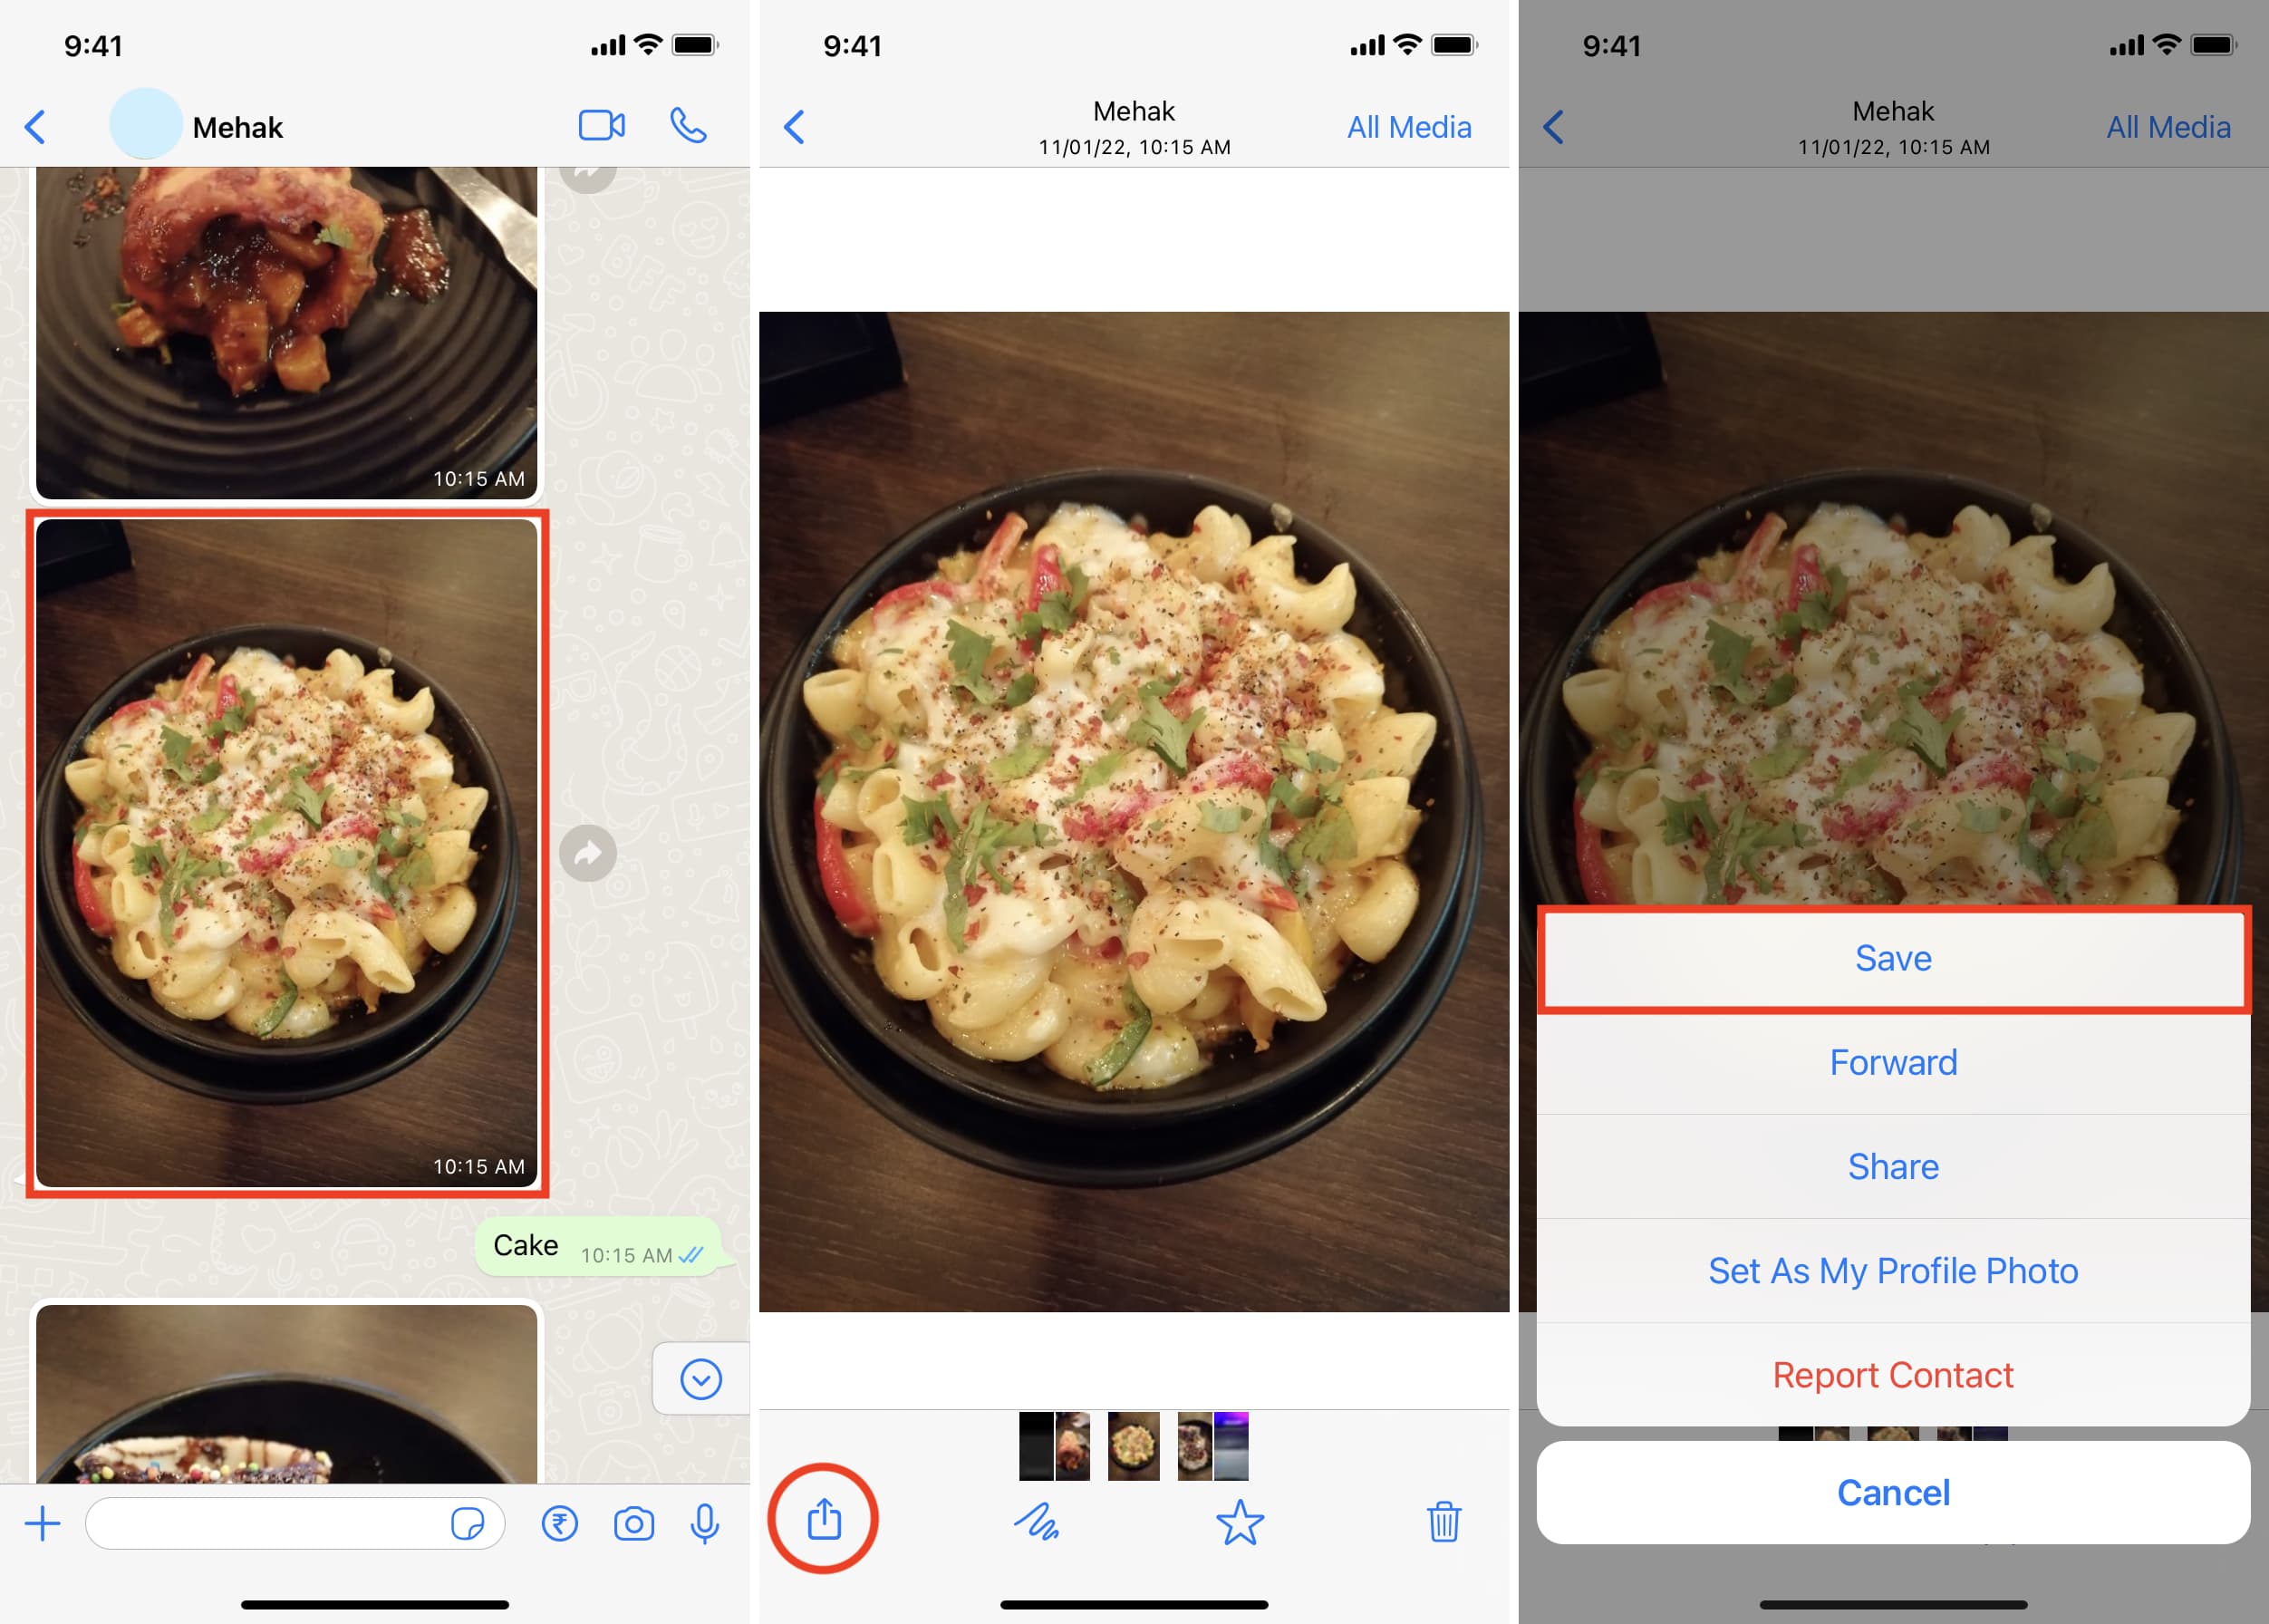 Manually save image from WhatsApp to iPhone Photos app